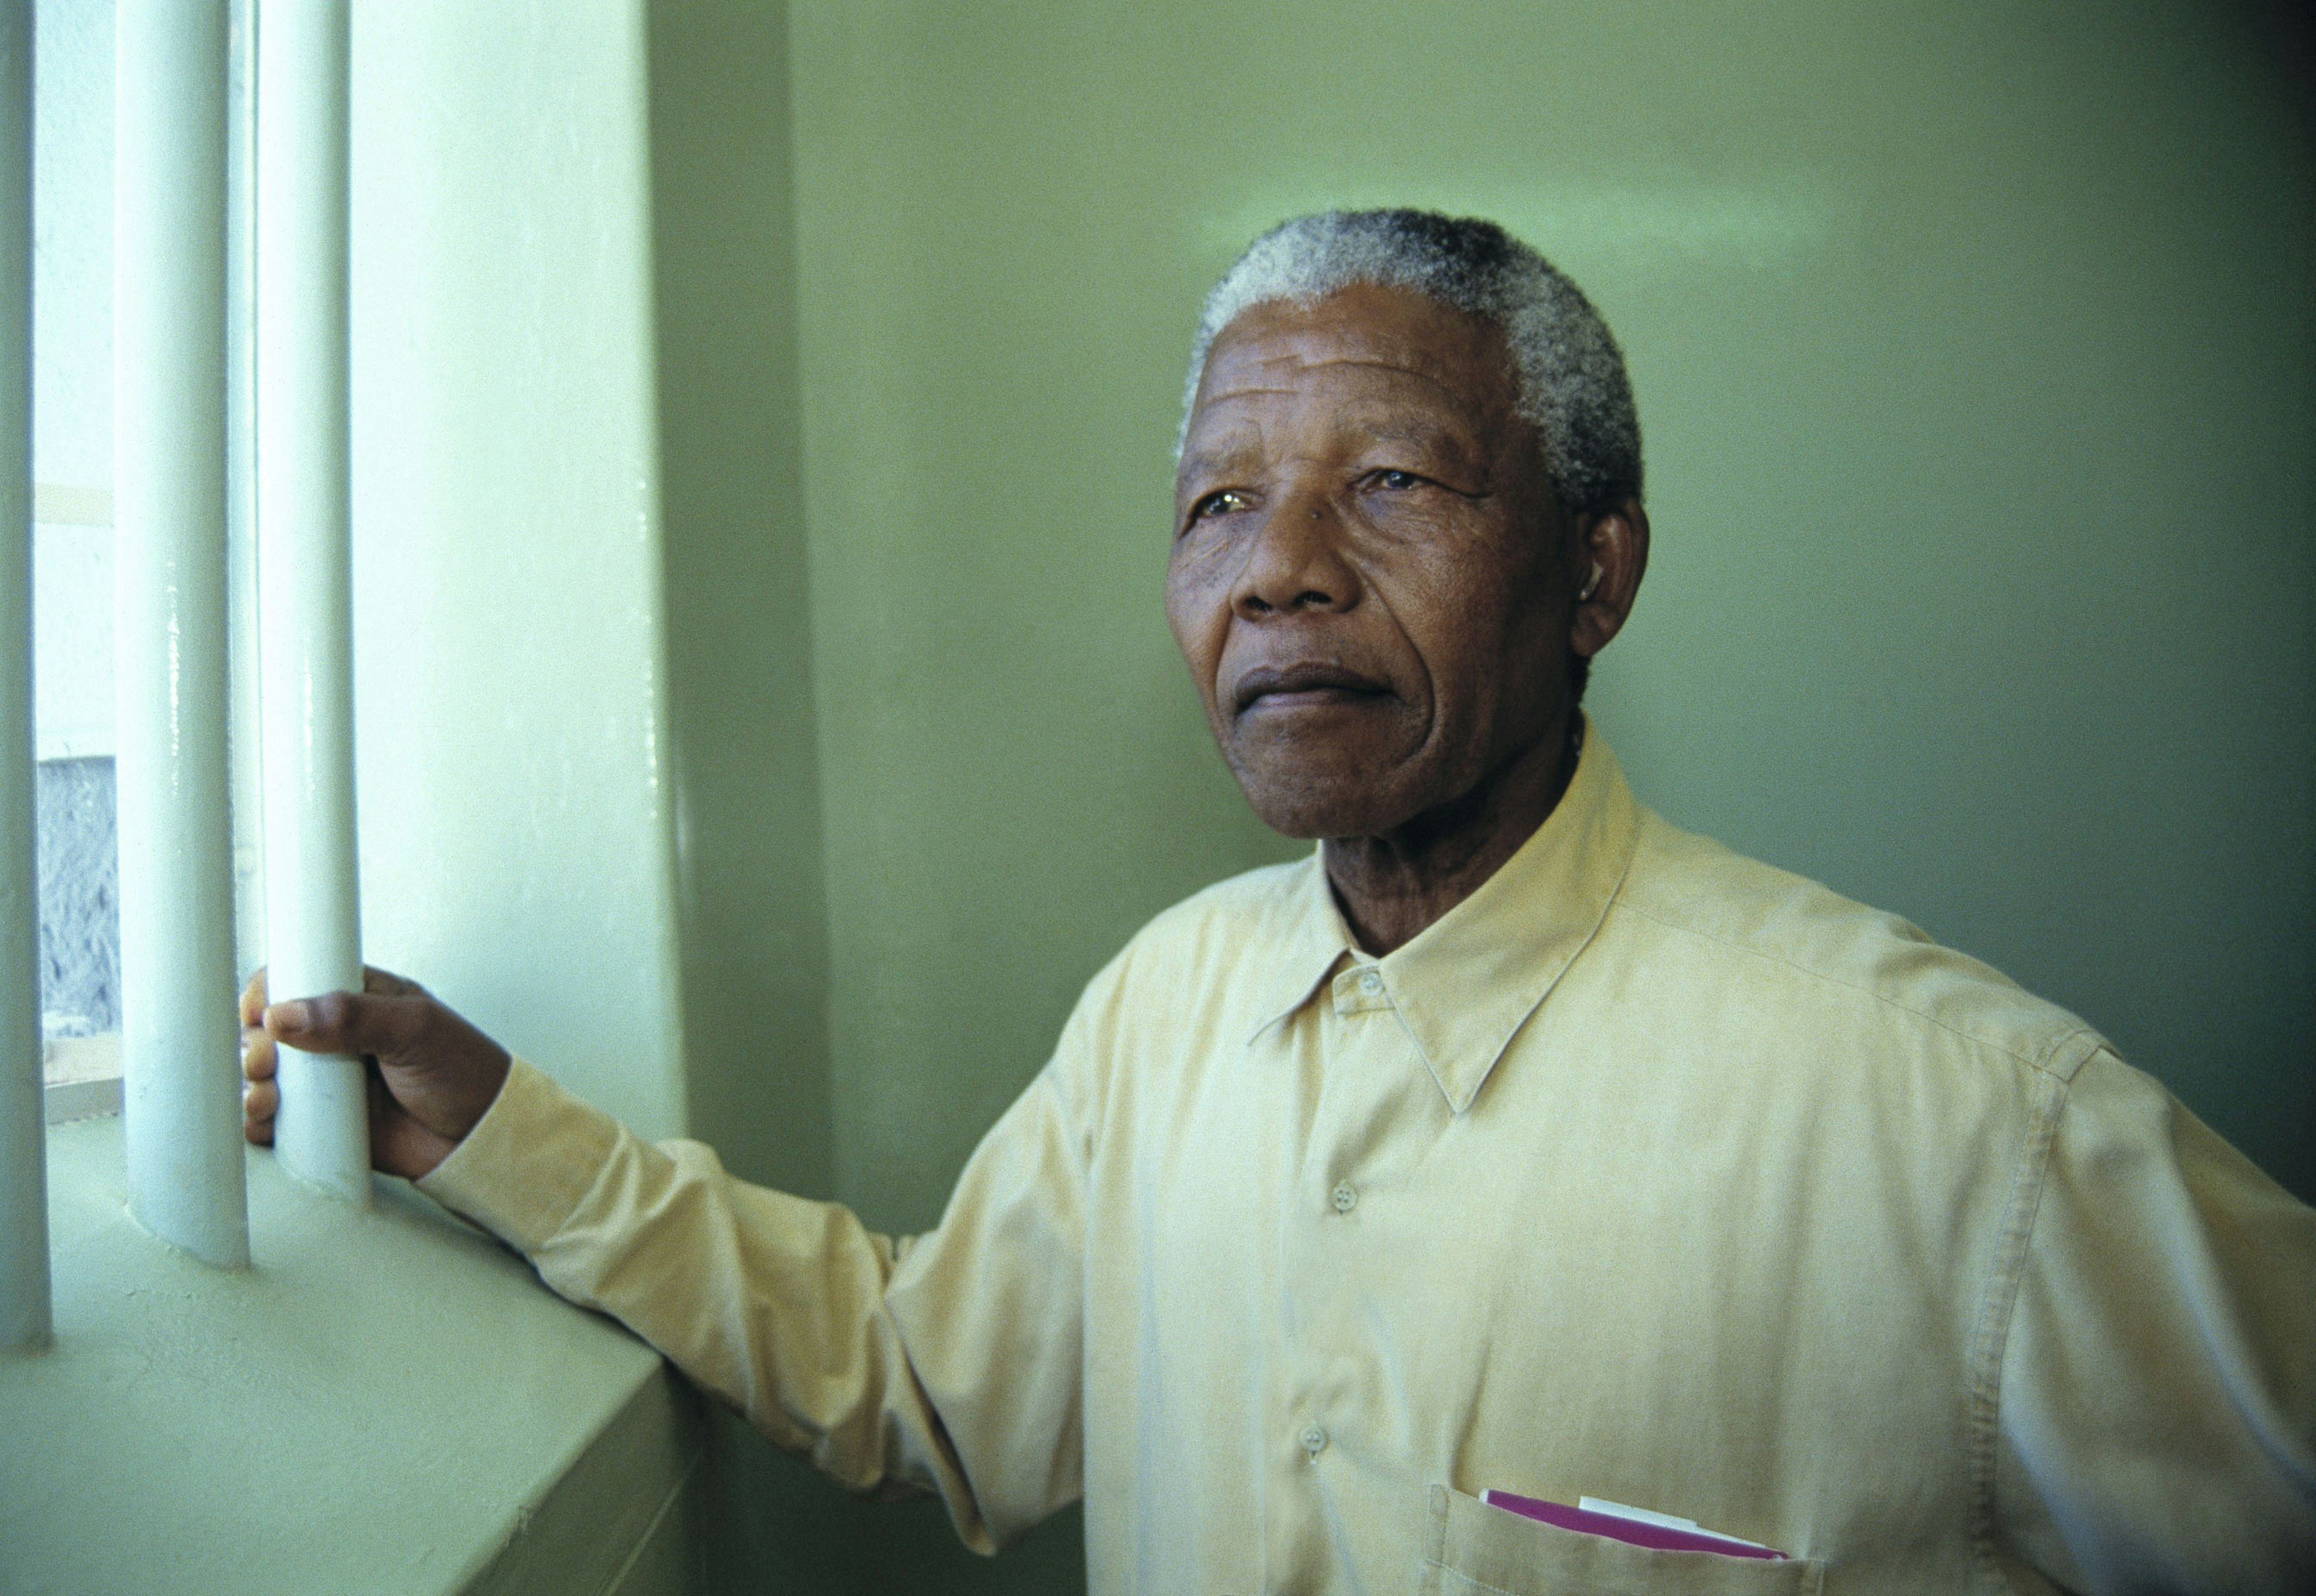 Nelson Mandela revisits the cell at Robben Island prison in February 1994 where he was jailed for more than two decades. 